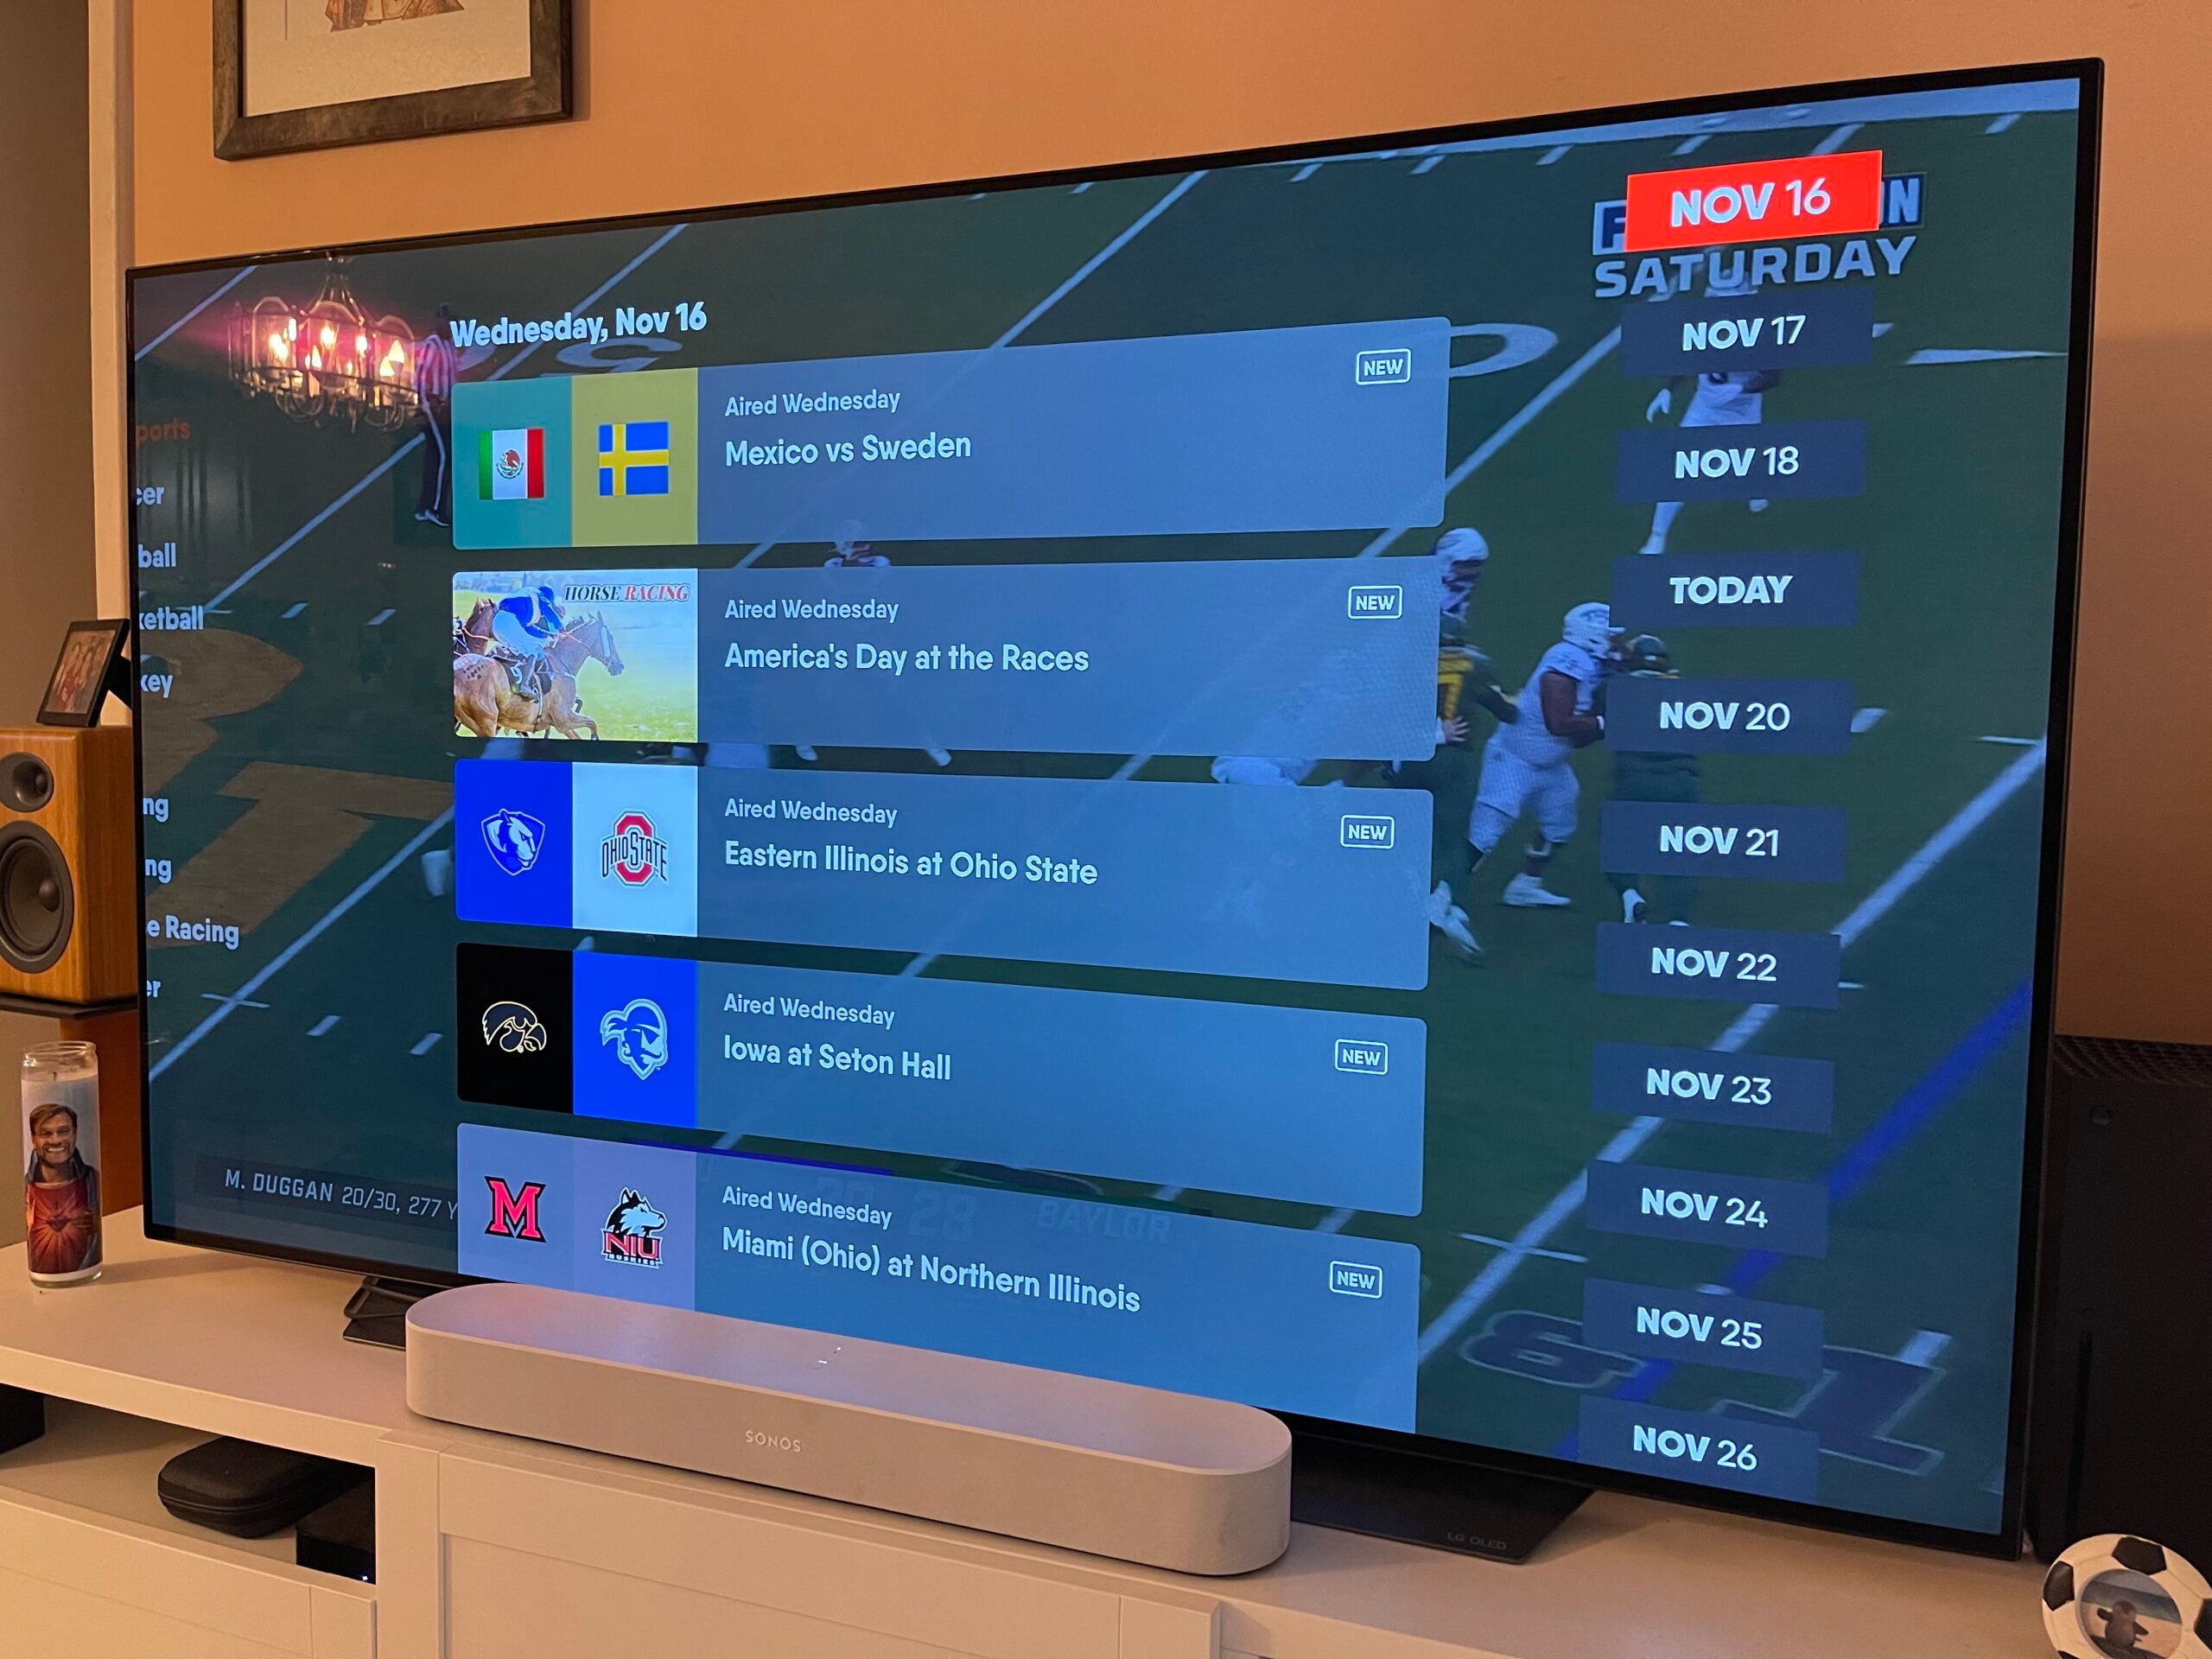 How to Watch Nfl Games on Vizio Smart Tv?